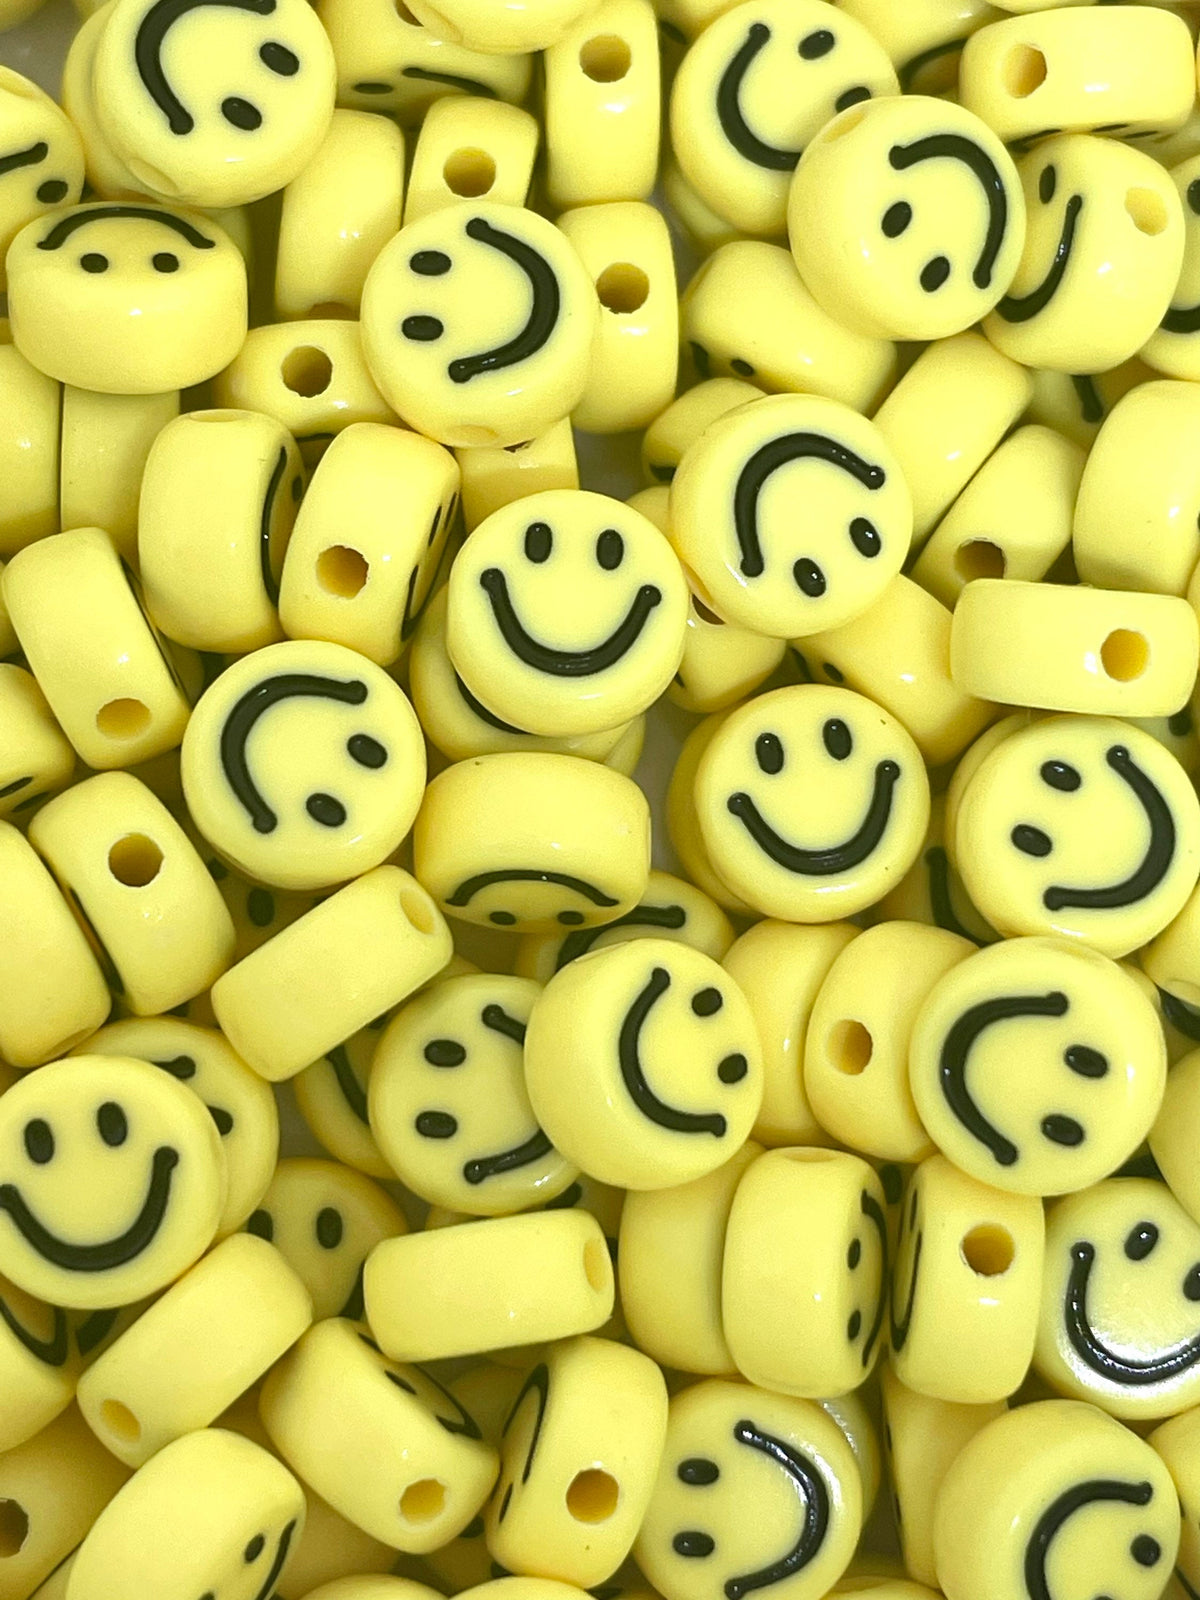 SMOL Yellow Smiley Face Beads, Charms for Bracelet, Necklace, Jewelry